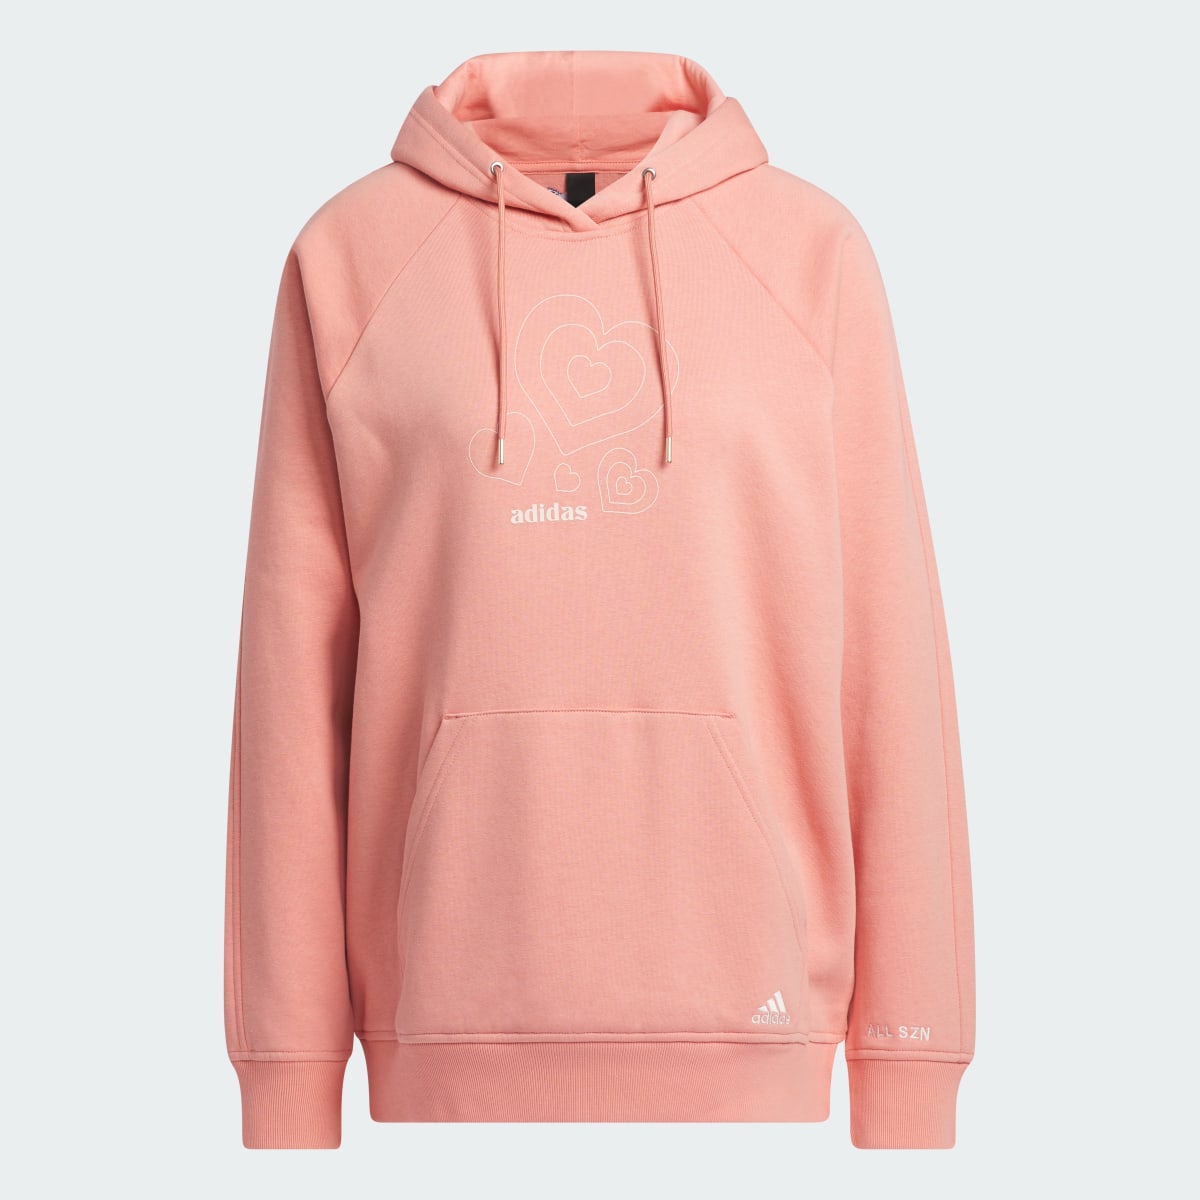 Adidas ALL SZN Valentine's Day Pullover Hoodie. 5